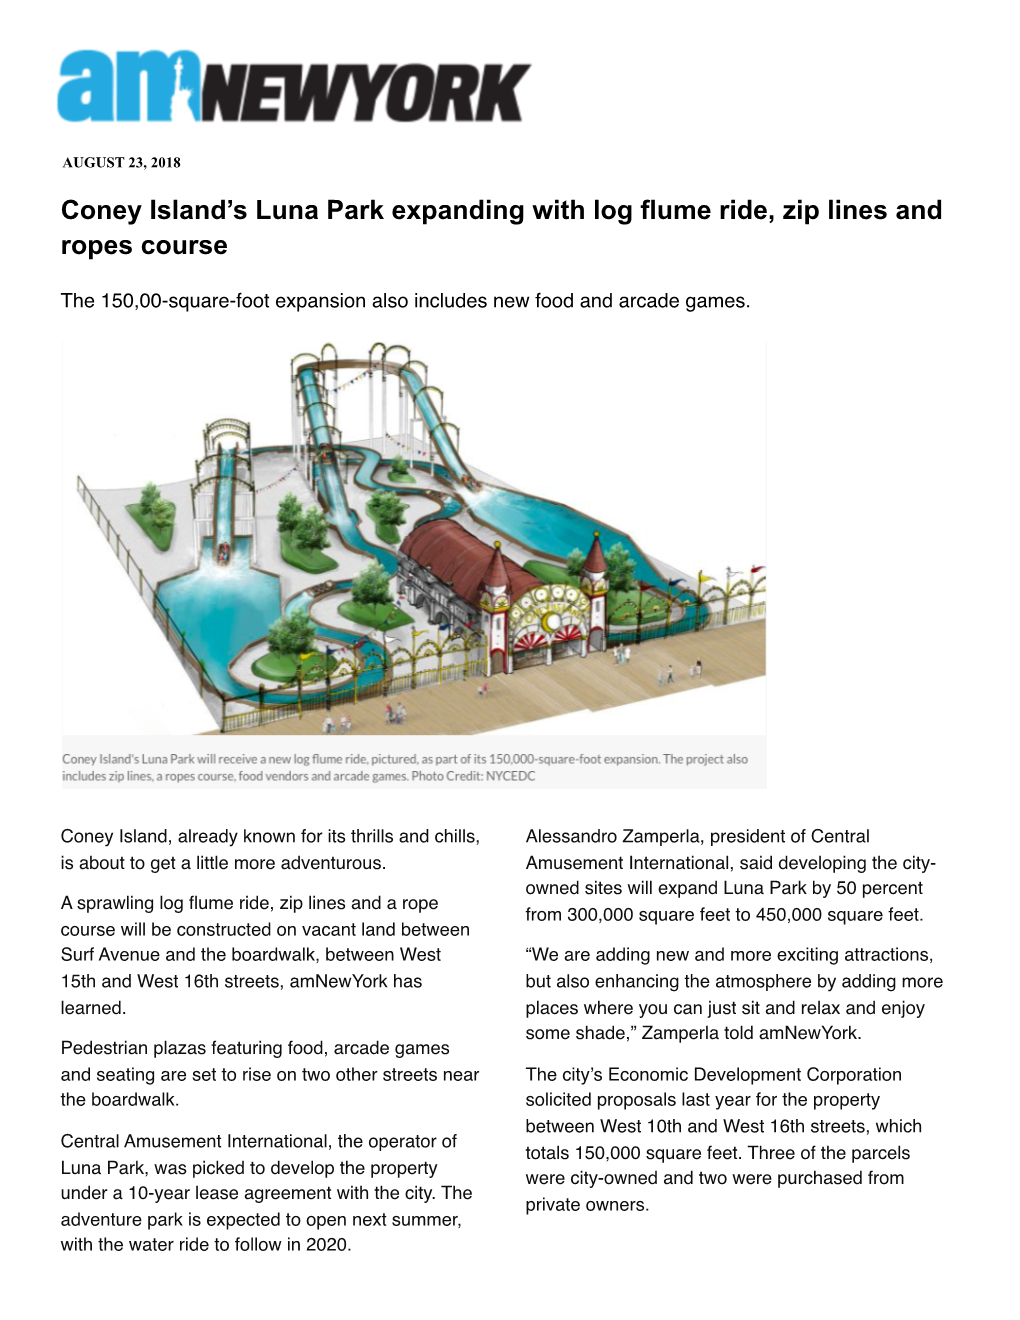 Coney Island's Luna Park Expanding with Log Flume Ride, Zip Lines And